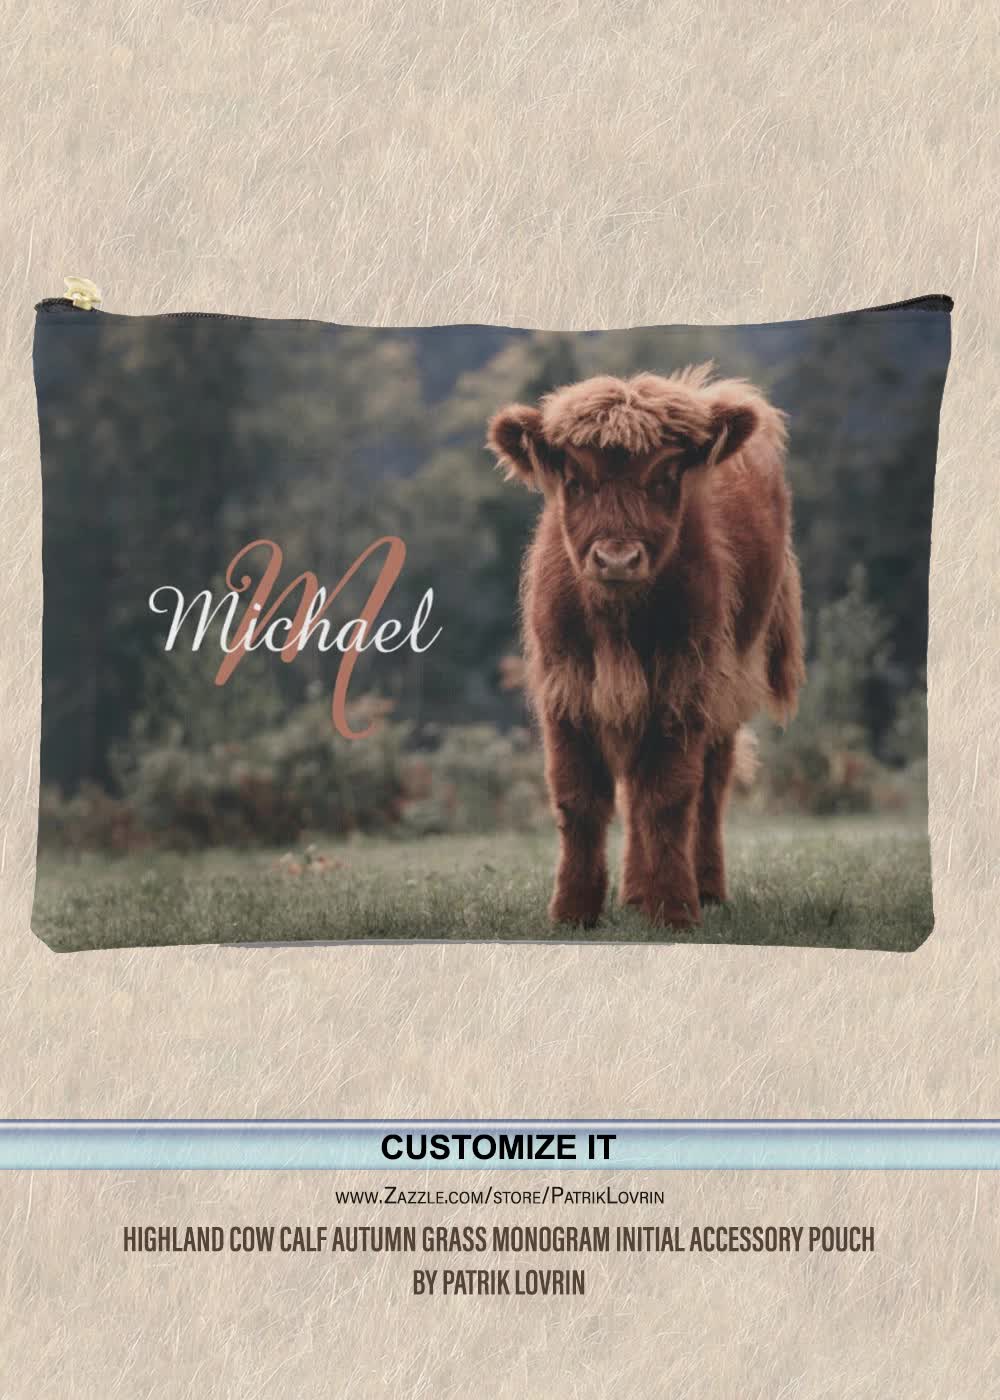 This contains an image of: Highland cow calf autumn grass monogram initial accessory zipper pouch by Patrik Lovrin, Zazzle bag